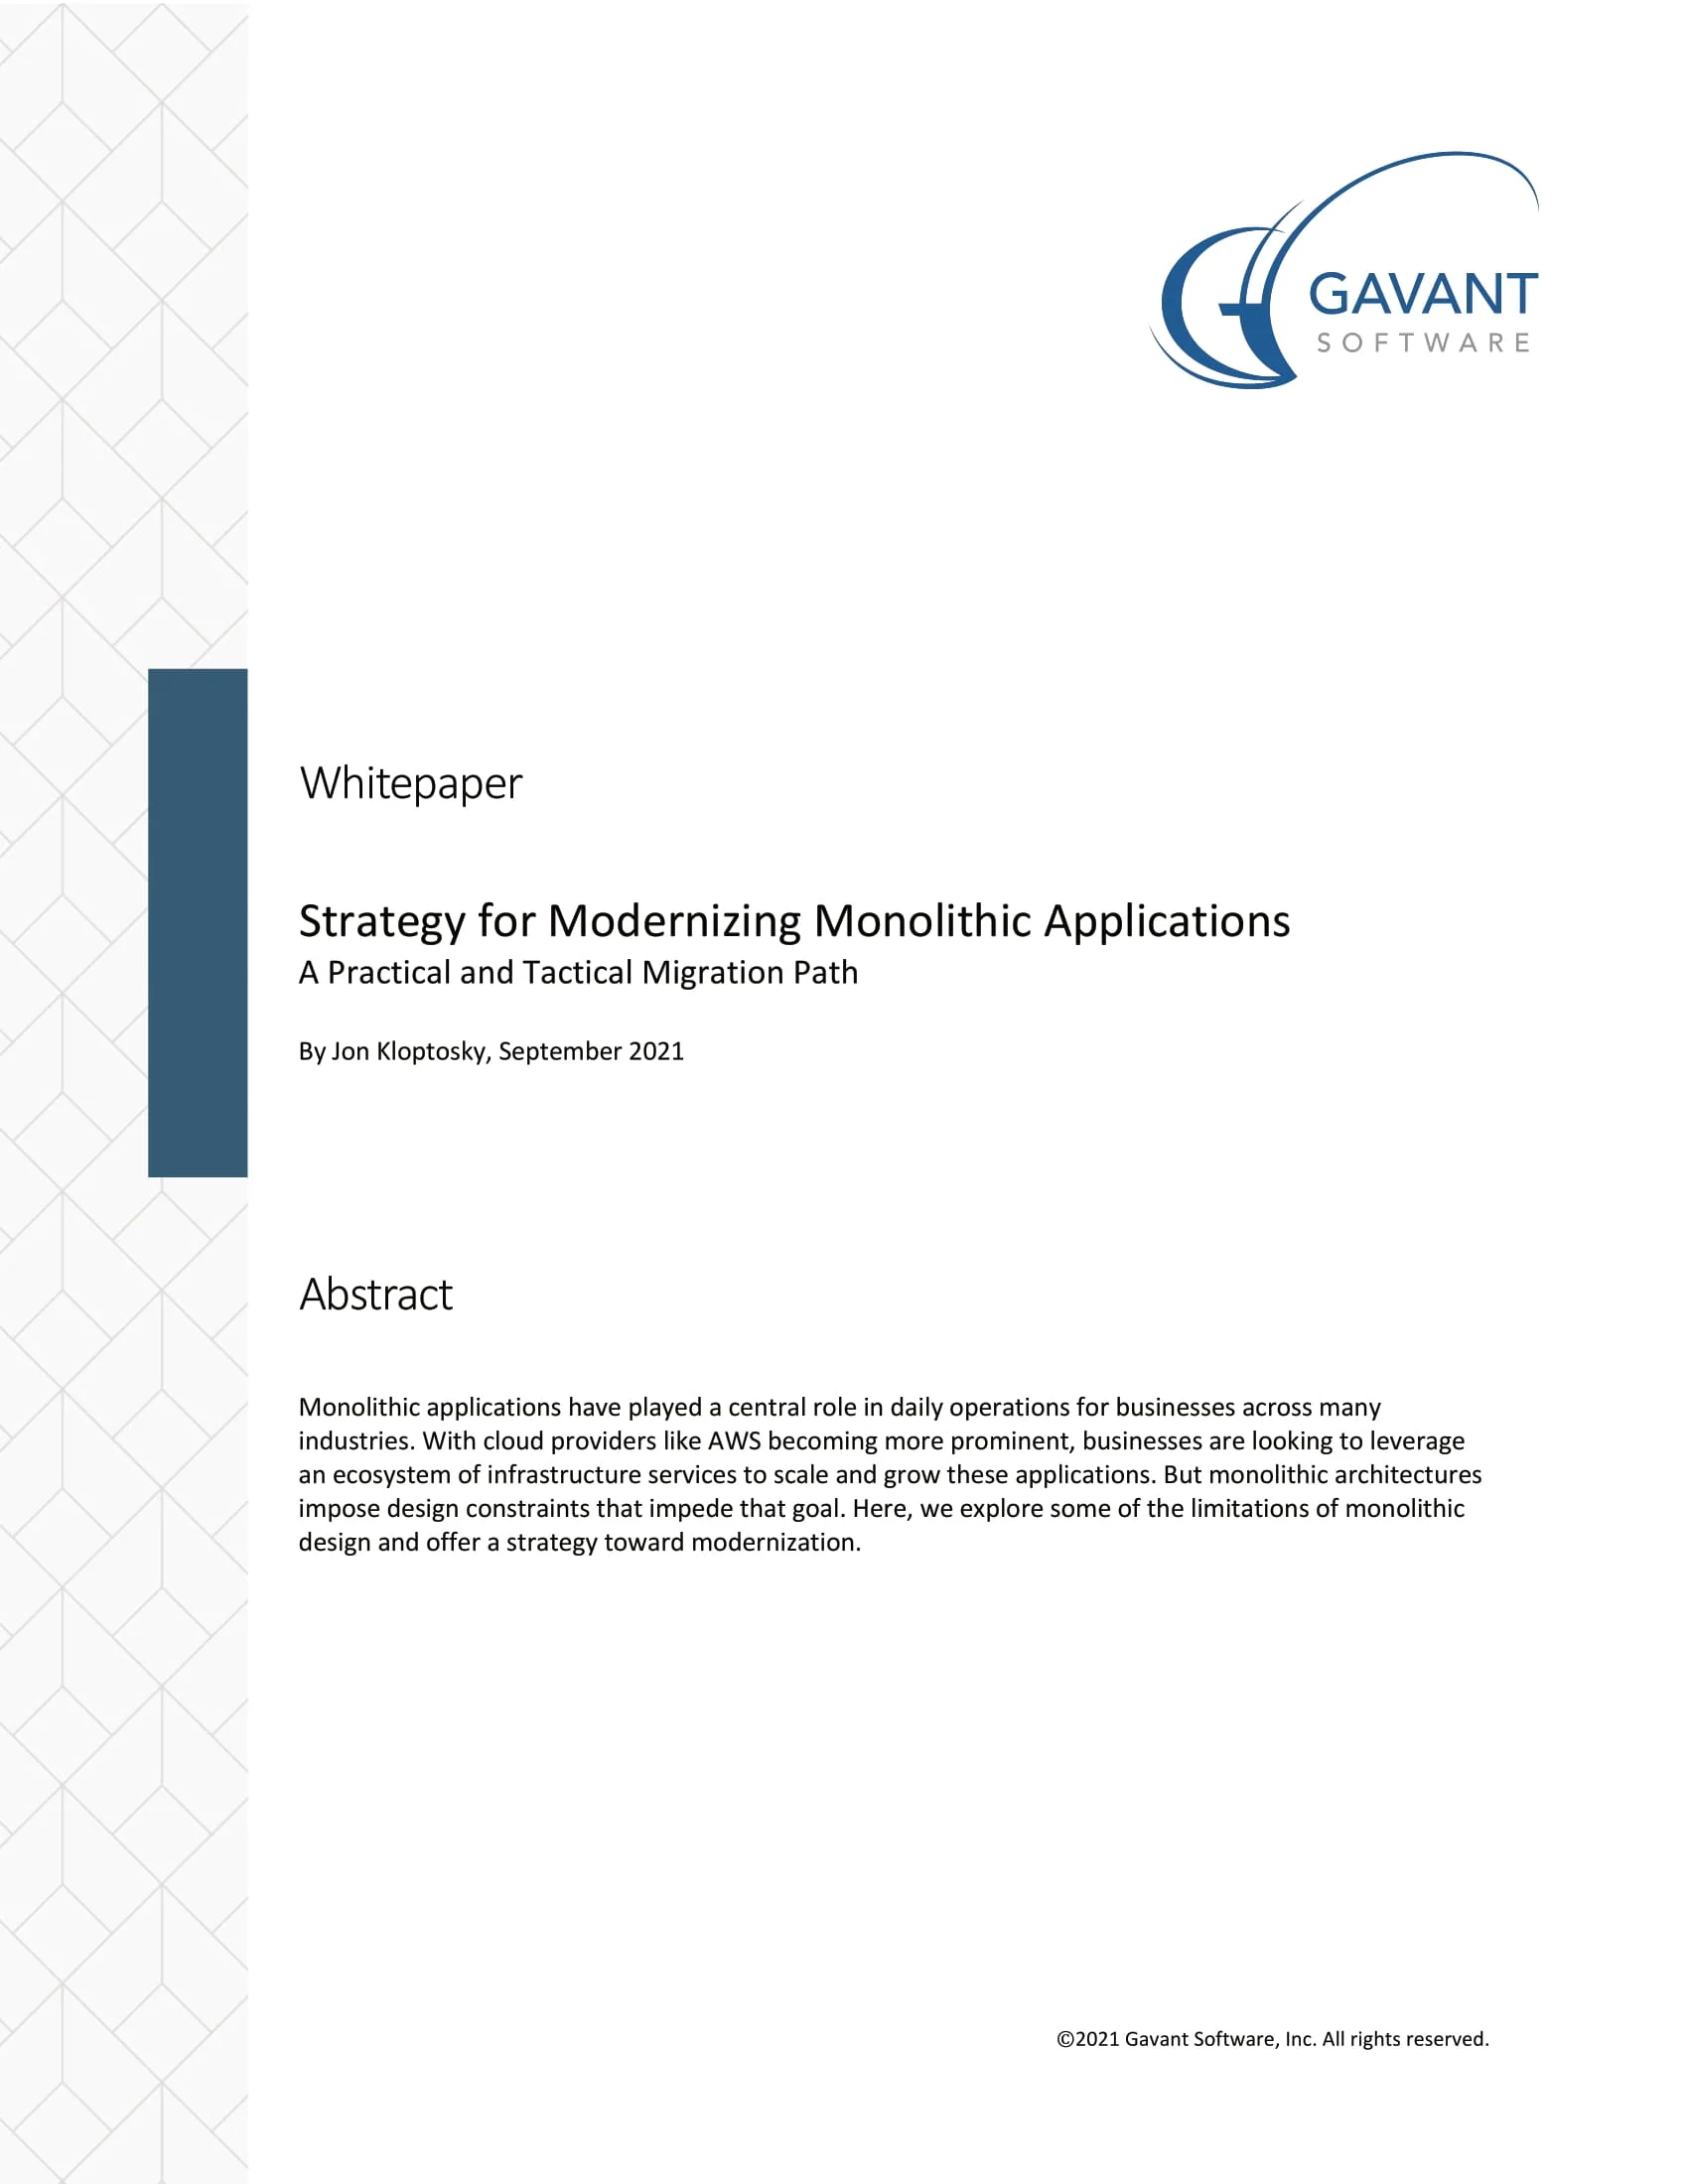 Strategy for Modernizing Monolithic Applications